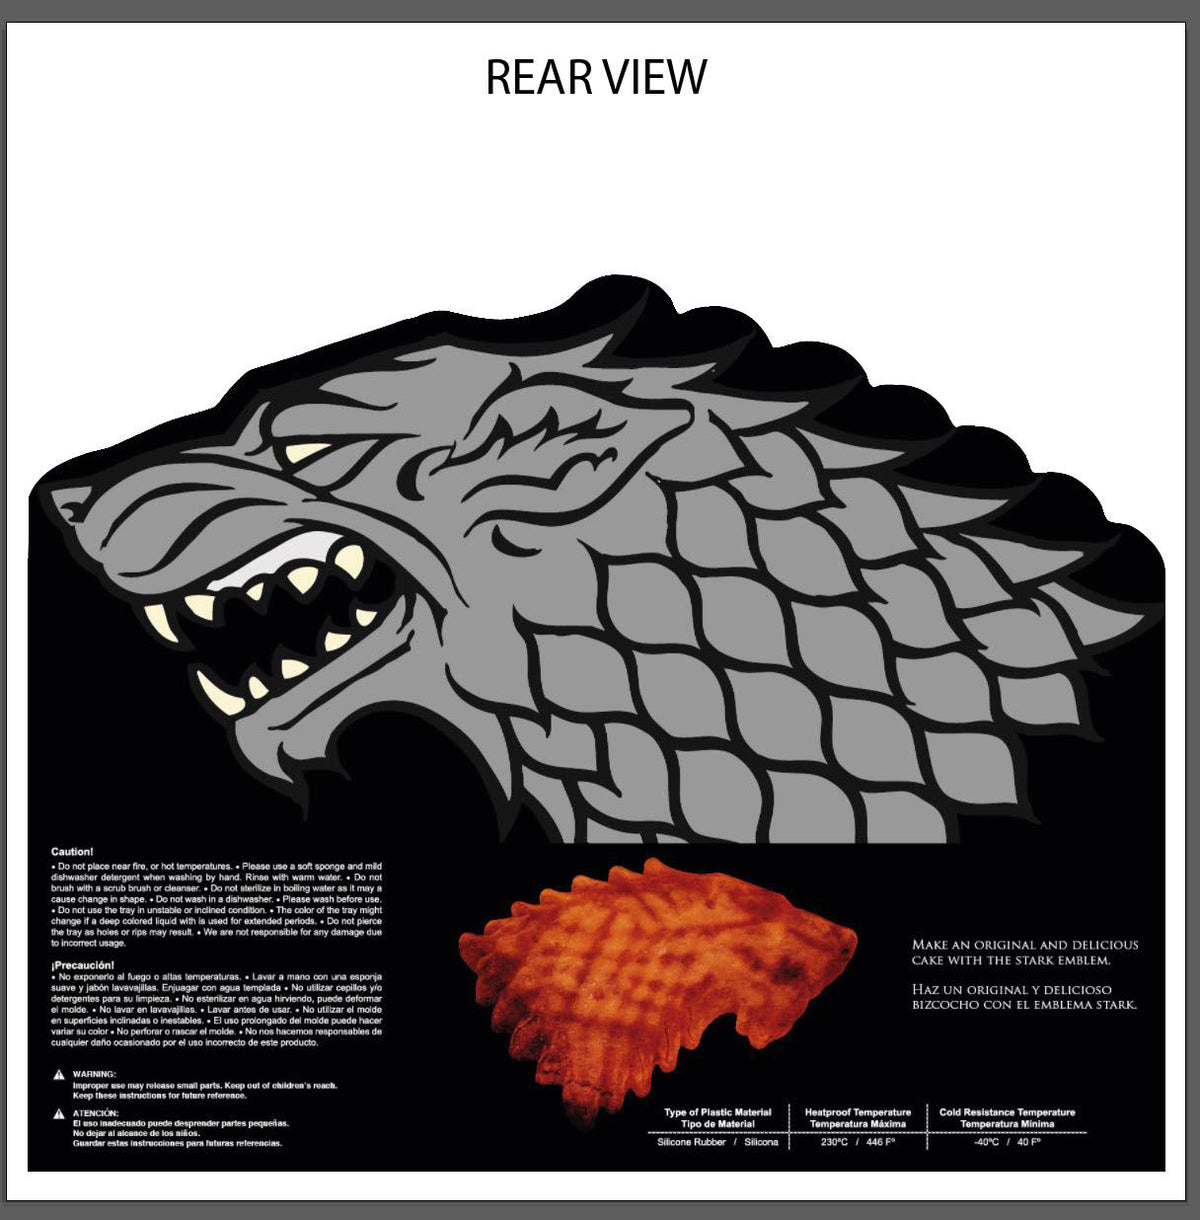 Game of Thrones Silicone Cake Pan | Official House Stark Dire Wolf Cake Mold